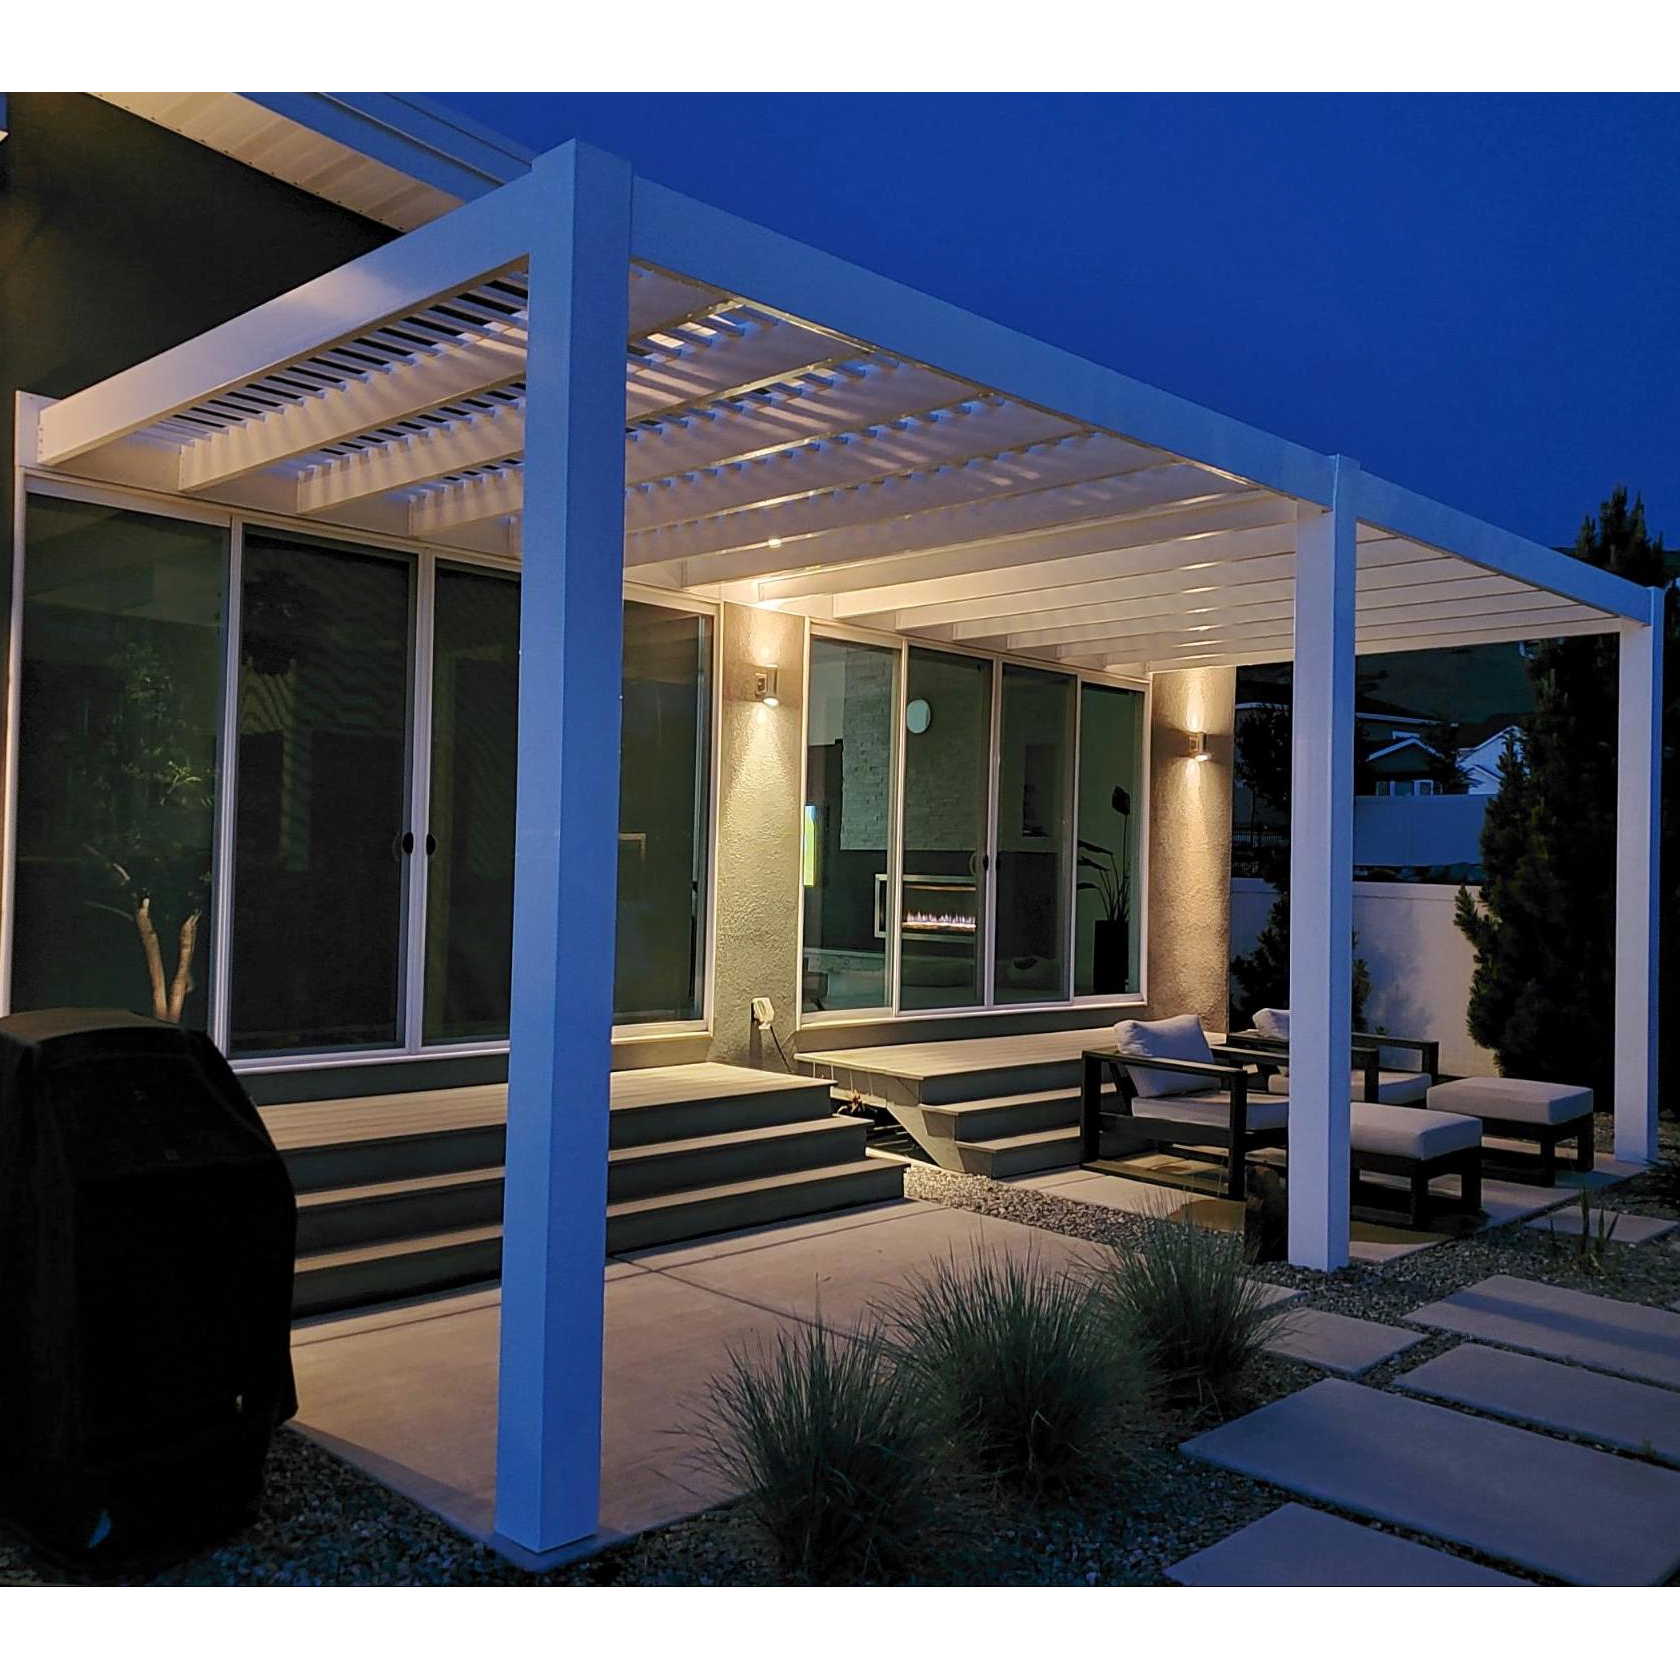 Nighttime view of a white modern attached 3-post pergola covering a 2-part patio behind a stucco home